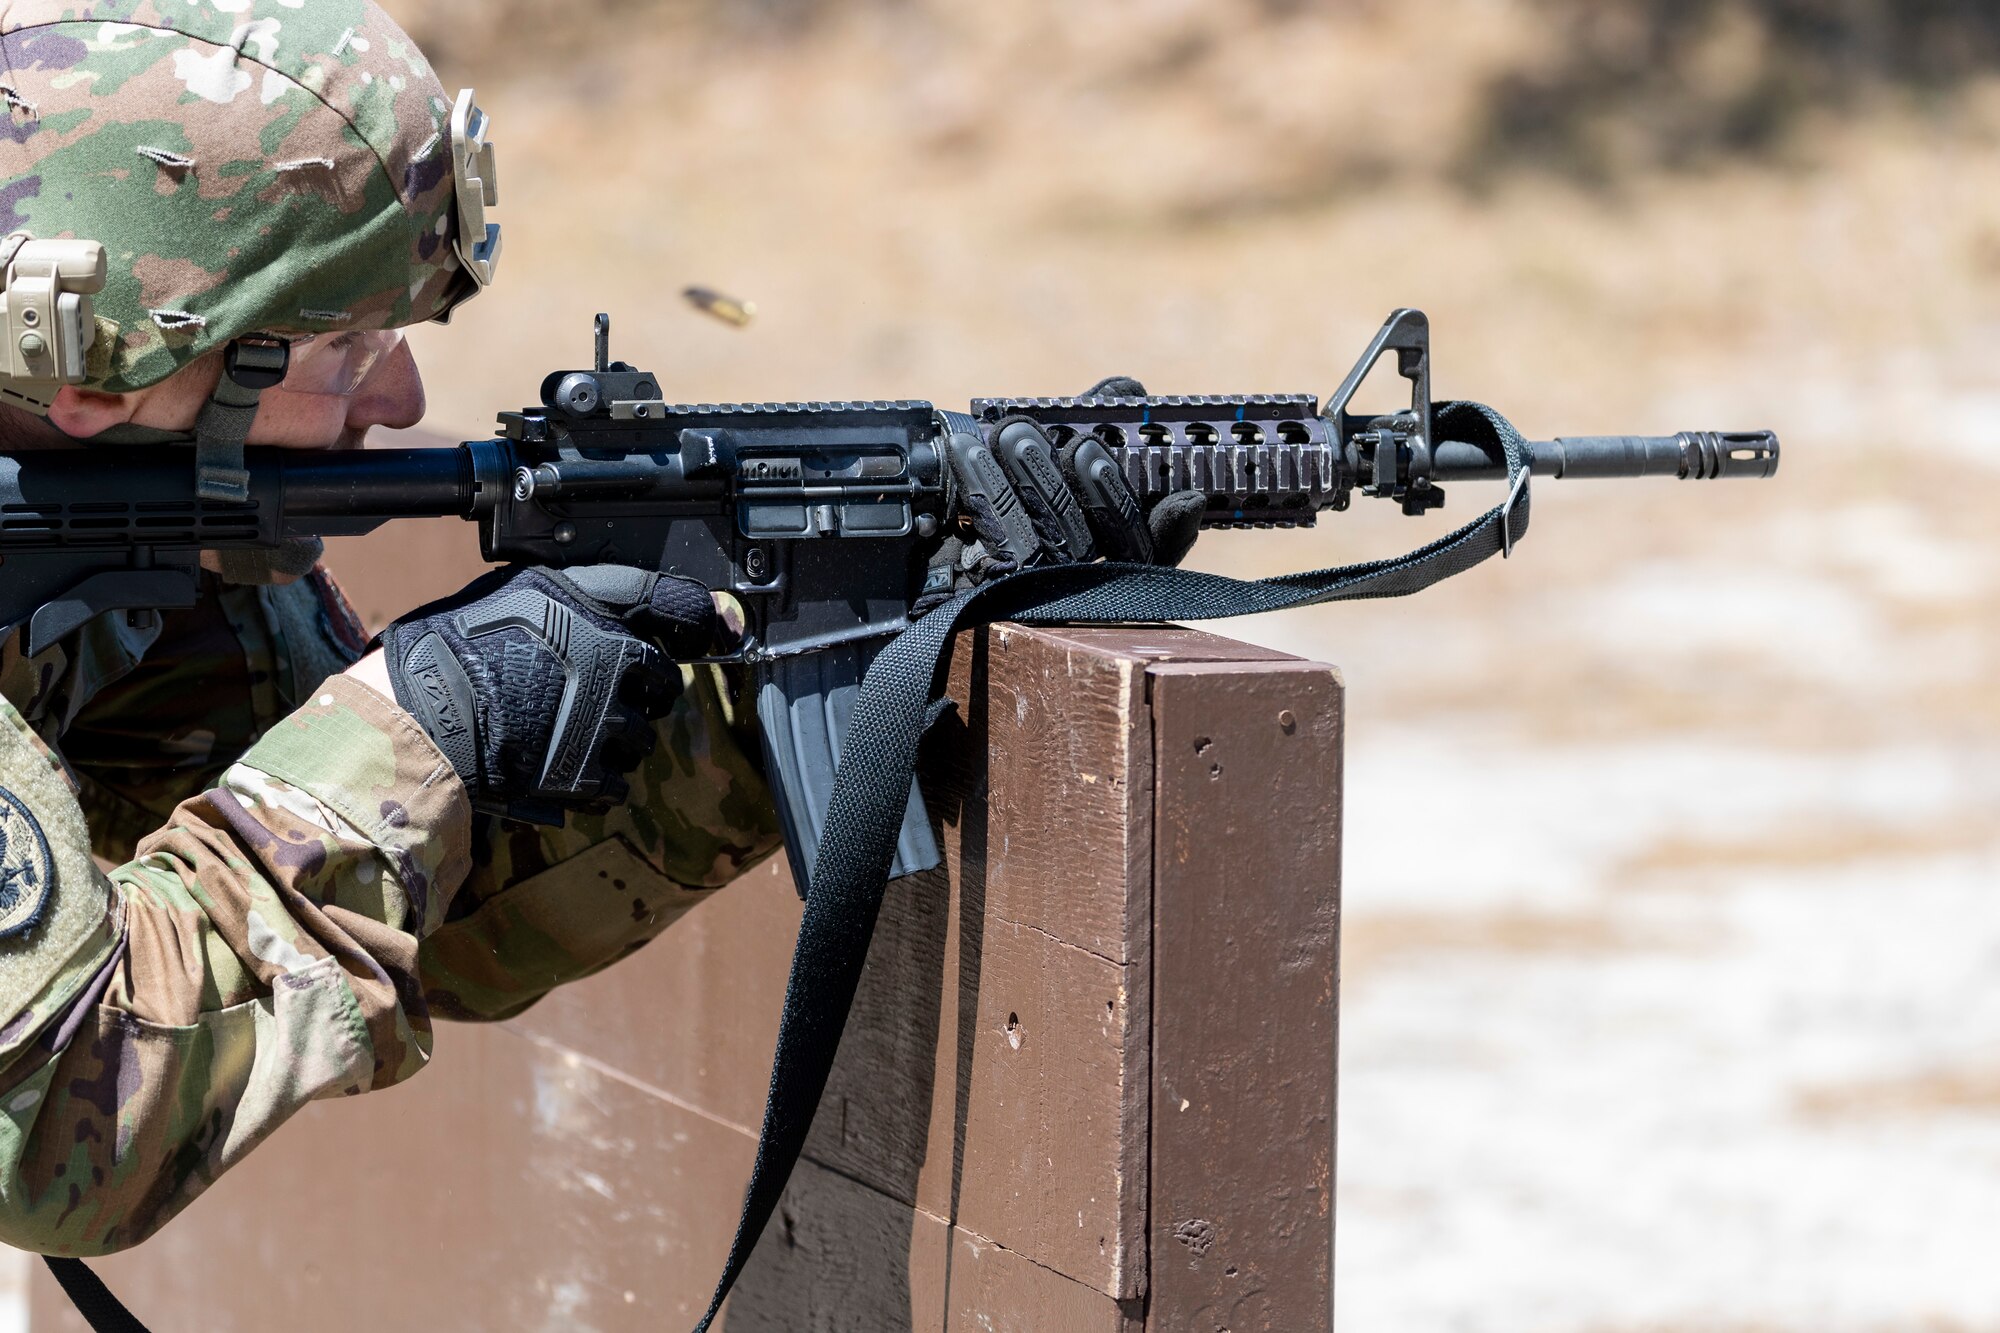 U.S. Air Force Senior Airman Alex Potts fires the M4 carbine during the New Jersey National Guard's Best Warrior Competition on Joint Base McGuire-Dix-Lakehurst, New Jersey, April 20, 2022. Potts is a survey team member with the 21st Weapons of Mass Destruction-Civil Support Team.